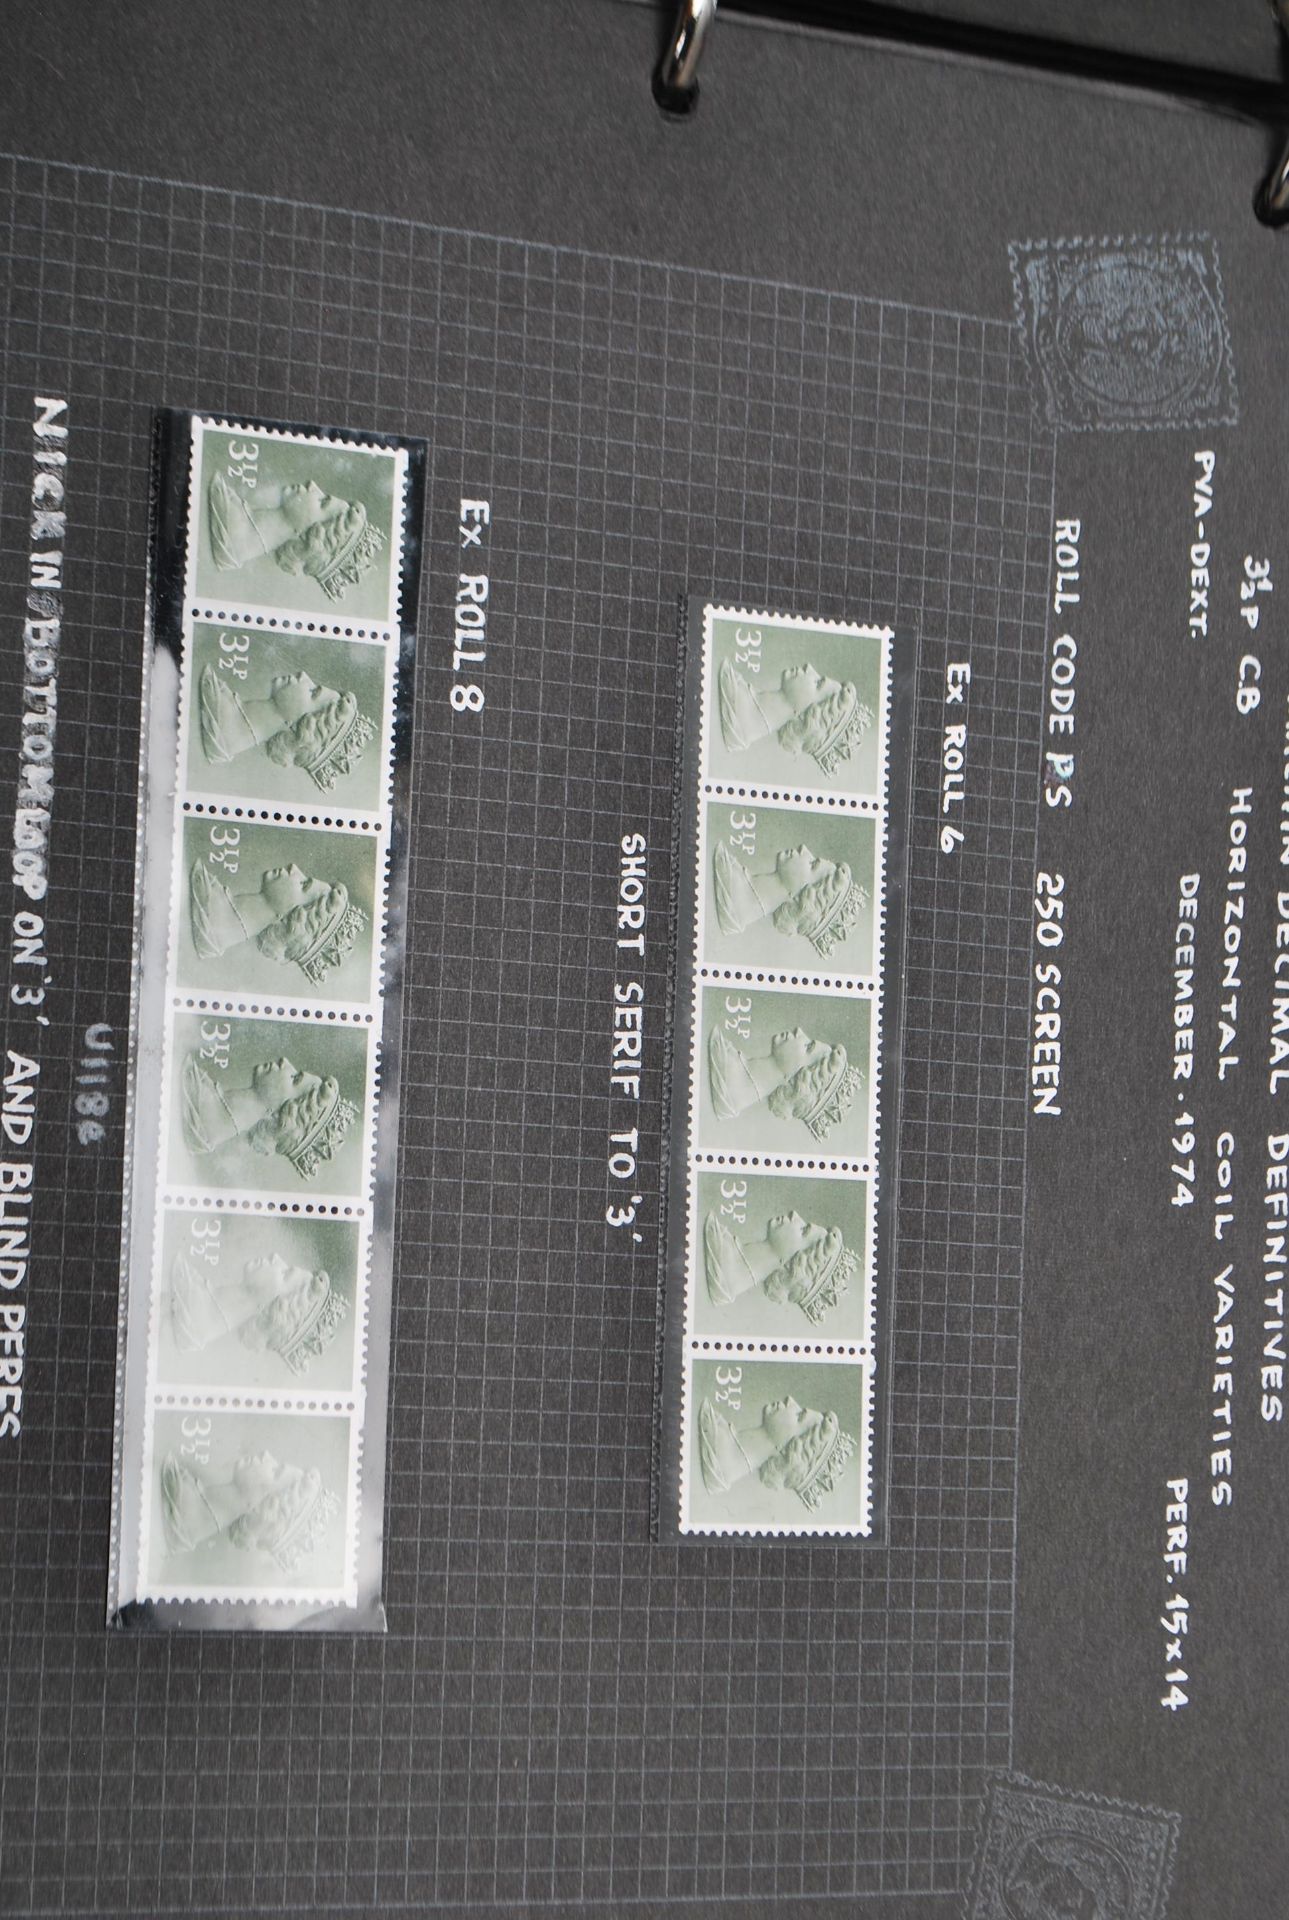 THREE ALBUMS OF MACHIN DEFINITIVE STAMPS + PRESENTATION - Image 15 of 25